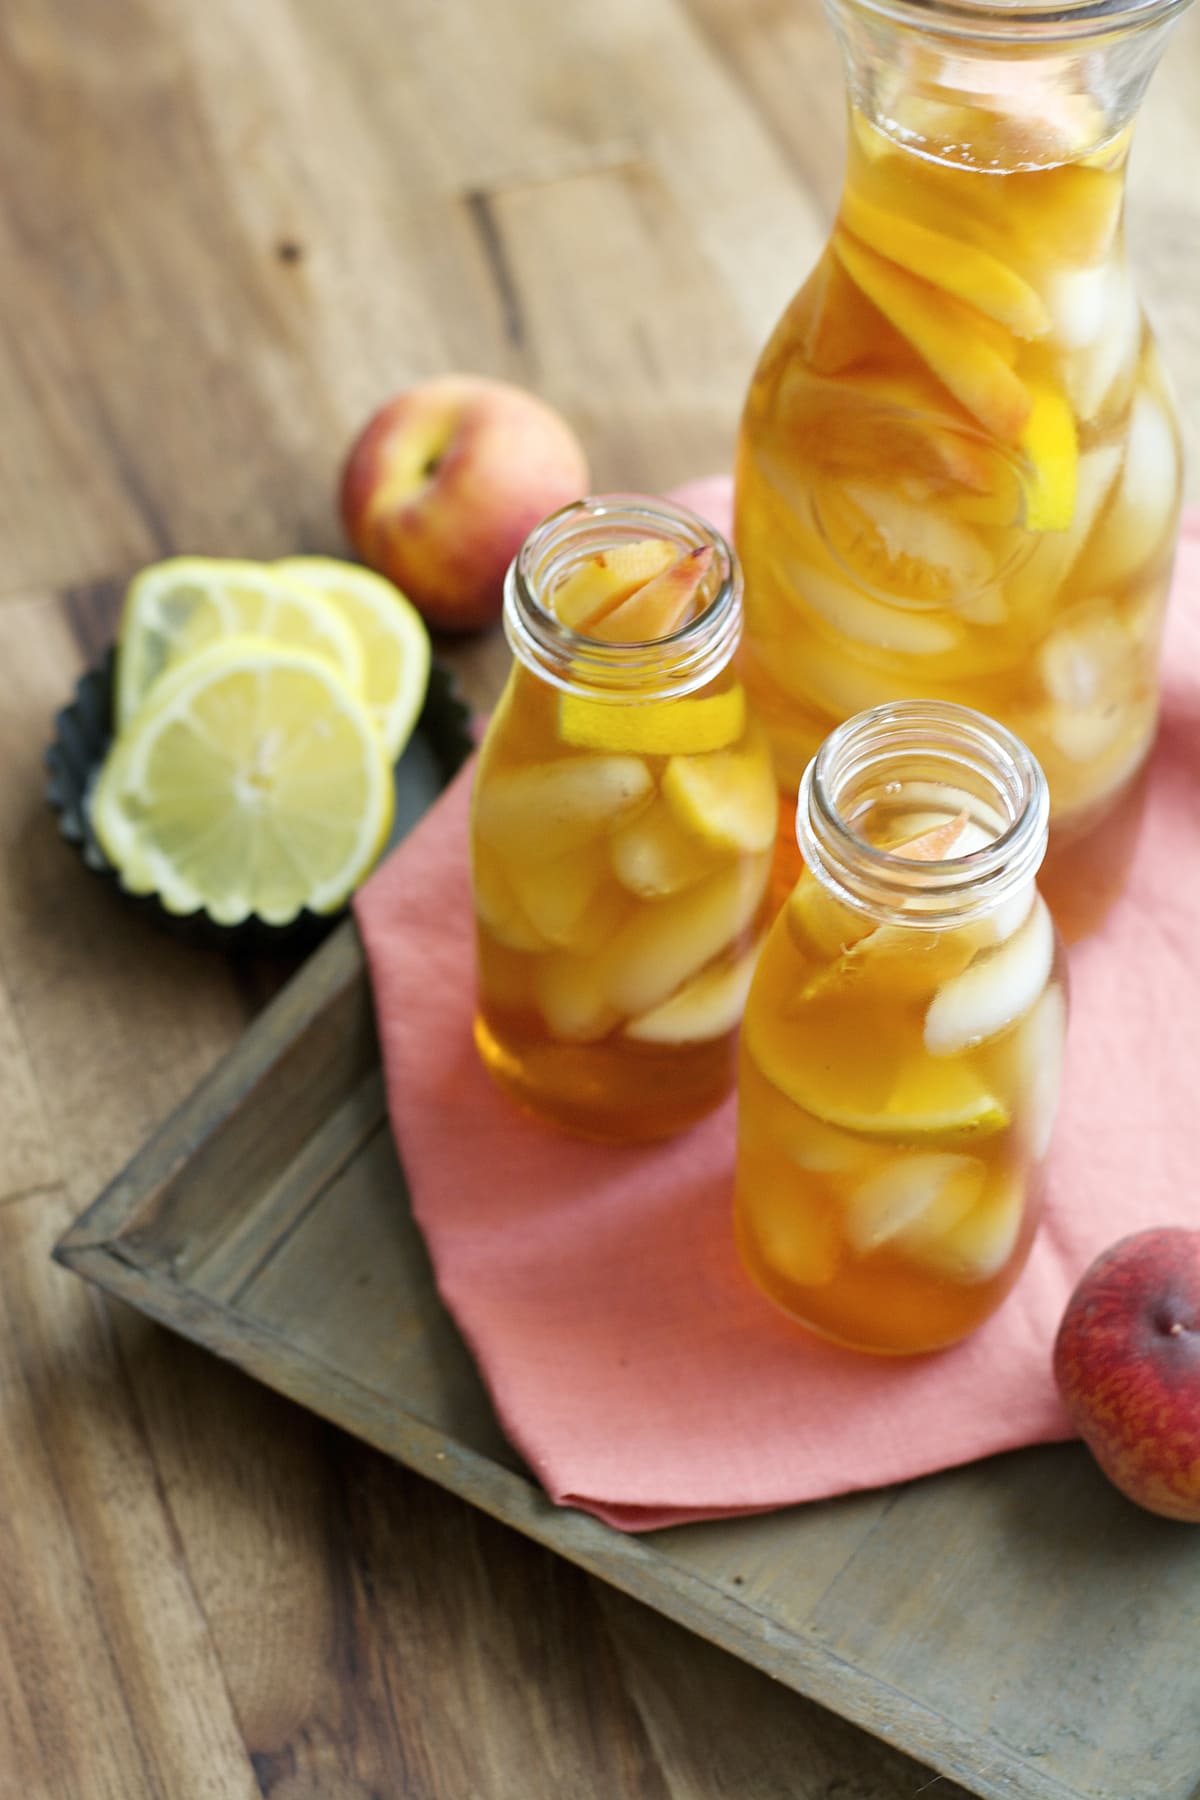 Sweet and refreshing Vanilla Peach Tea is the perfect Summer drink! Serve with fresh peach and lemon slices for simple Summer entertaining!